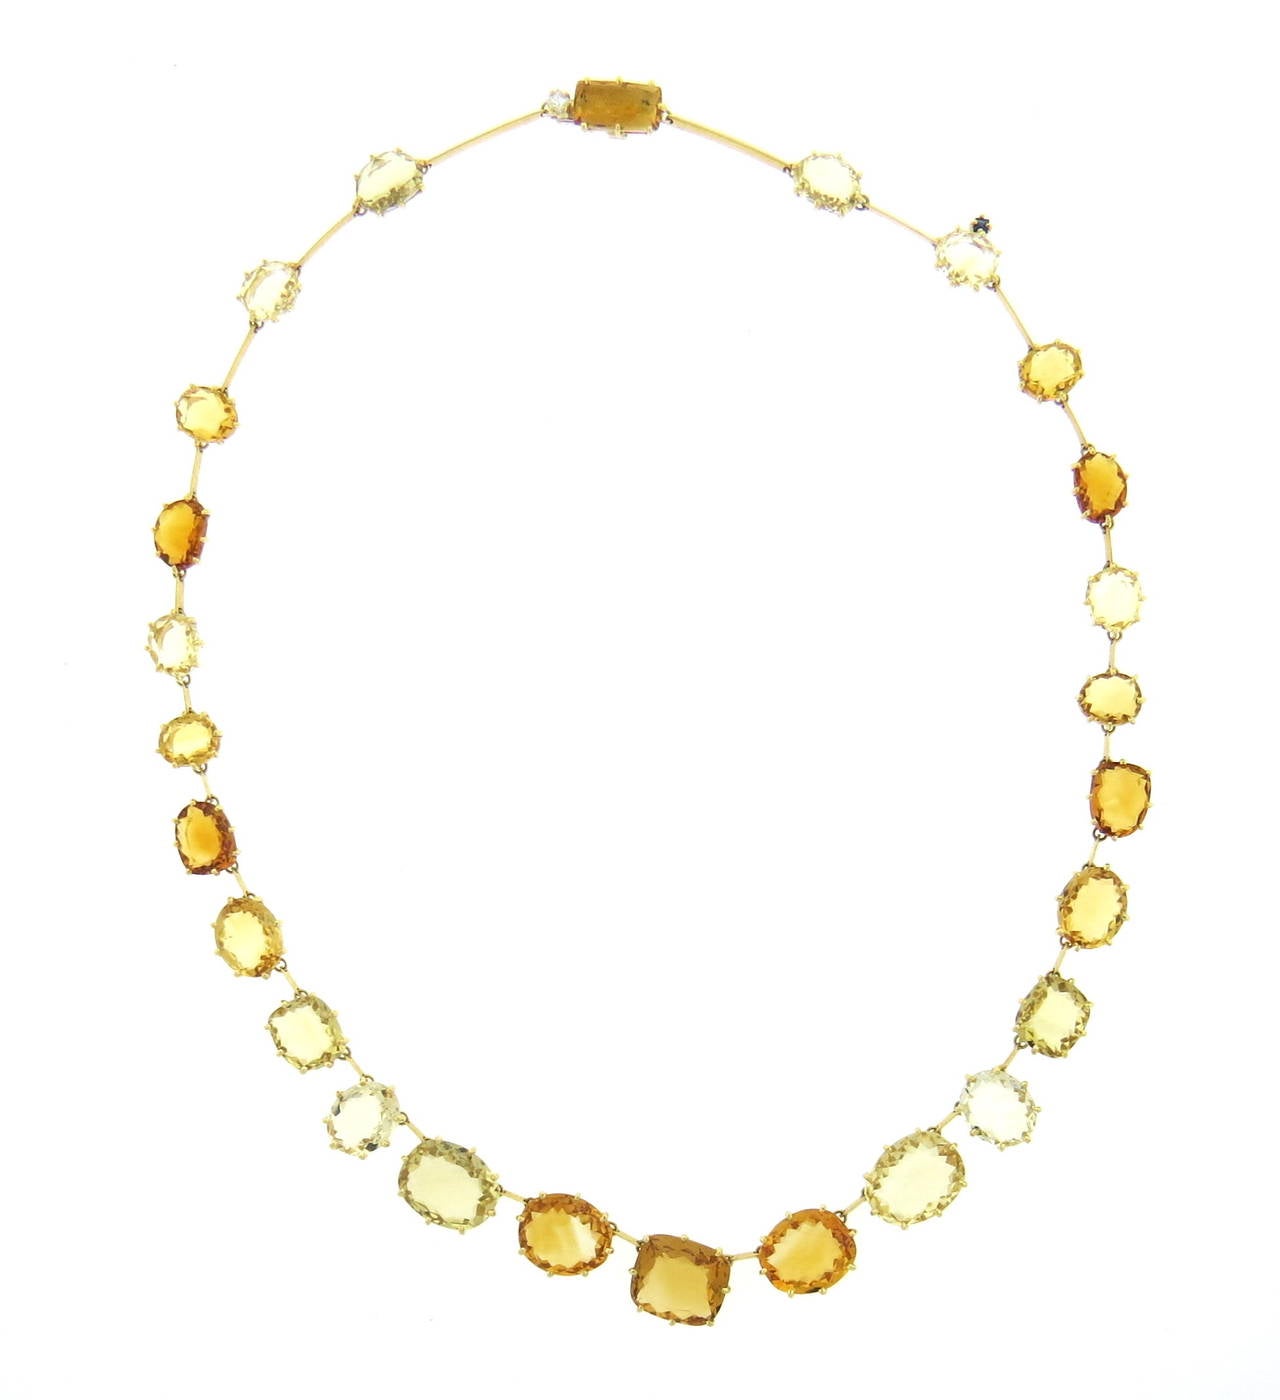 Beautiful 18k gold necklace, crafted by H Stern for Sunrise collection, set with lemon and orange faceted citrines and a diamond on the clasp. Necklace is 16 1/2